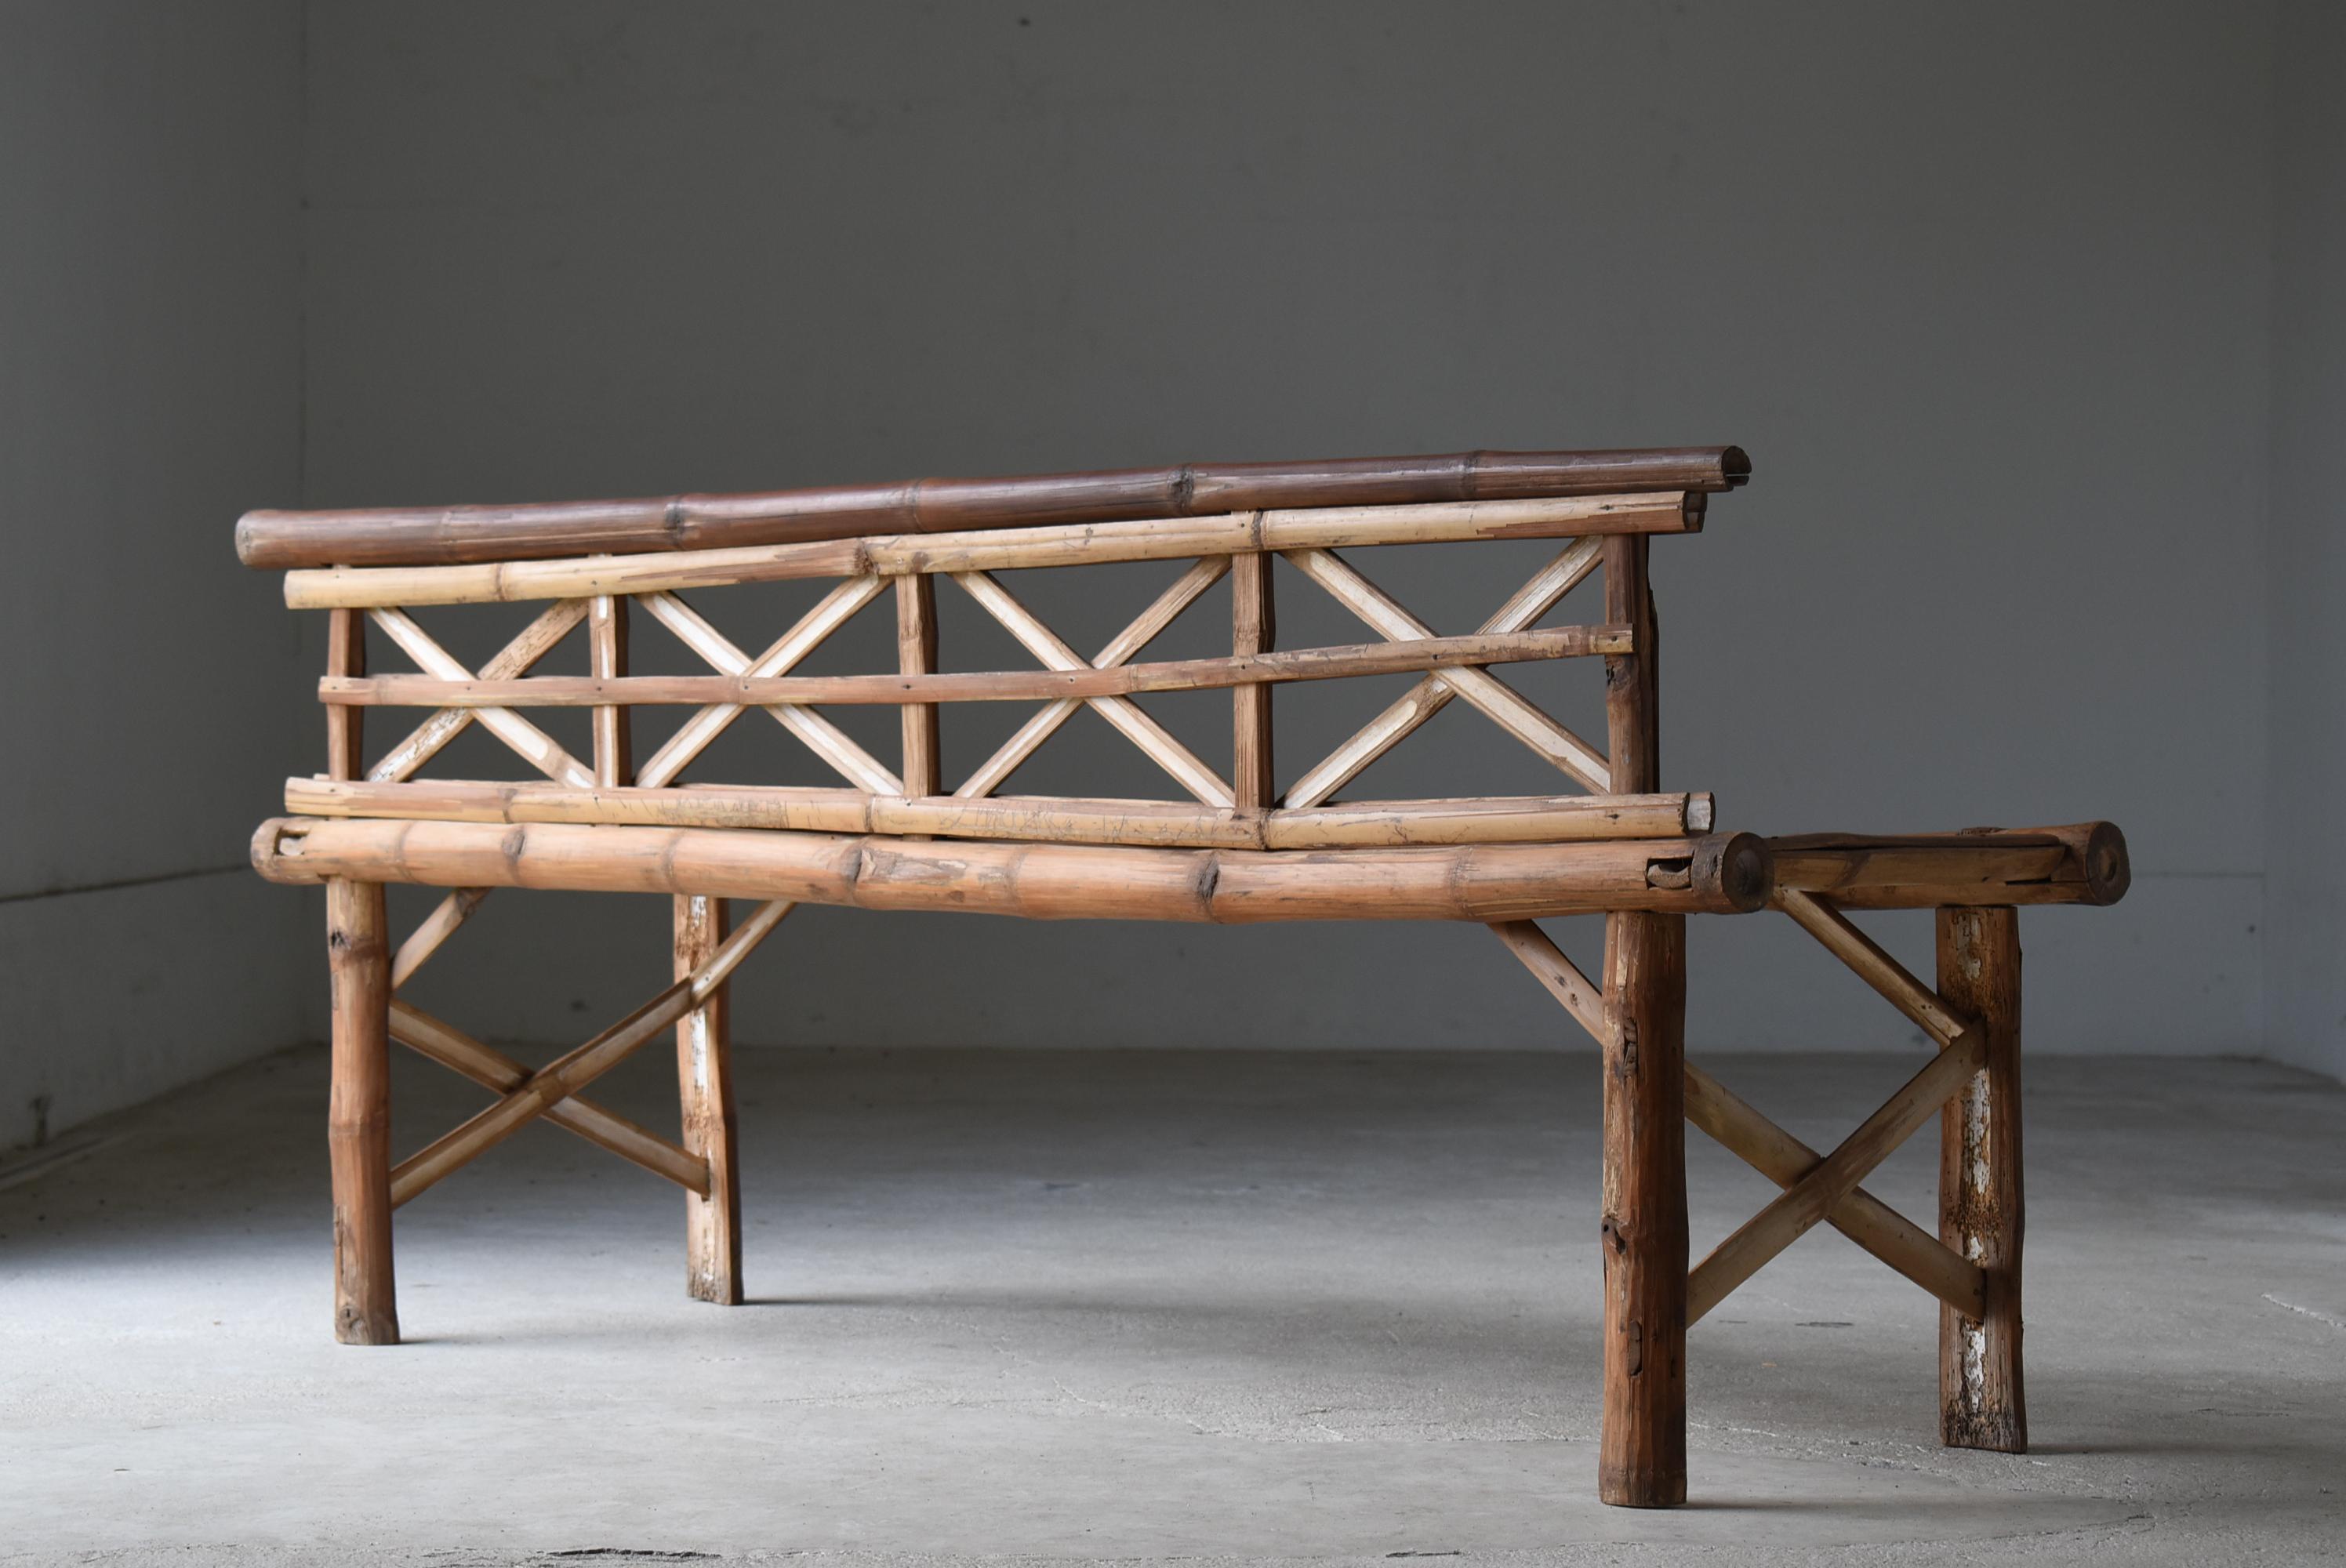 Japanese Old Bamboo Bench 1940s-1960s / Long Chair Mingei Wabisabi 5